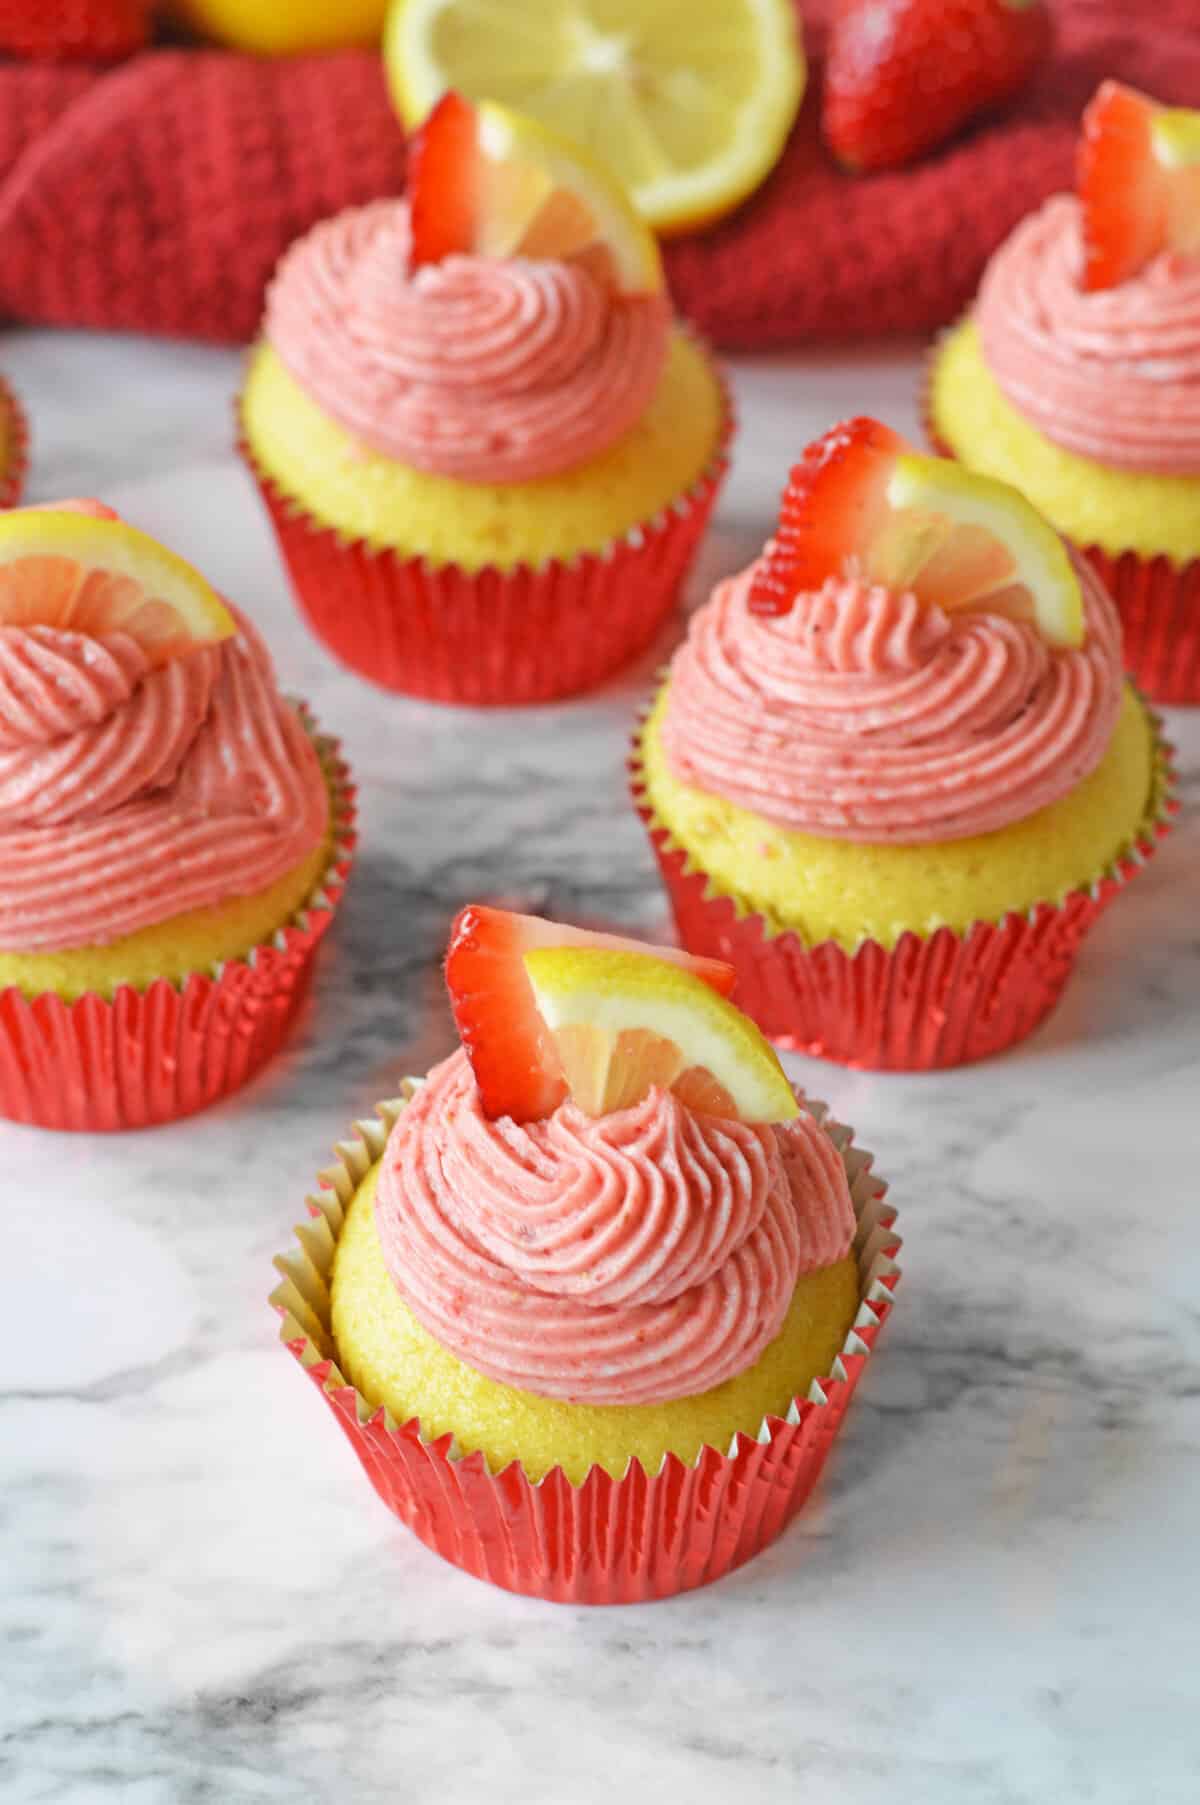 Lemon and Strawberry cupcakes made from lemon cake mix and topped with a strawberry lemonade frosting.